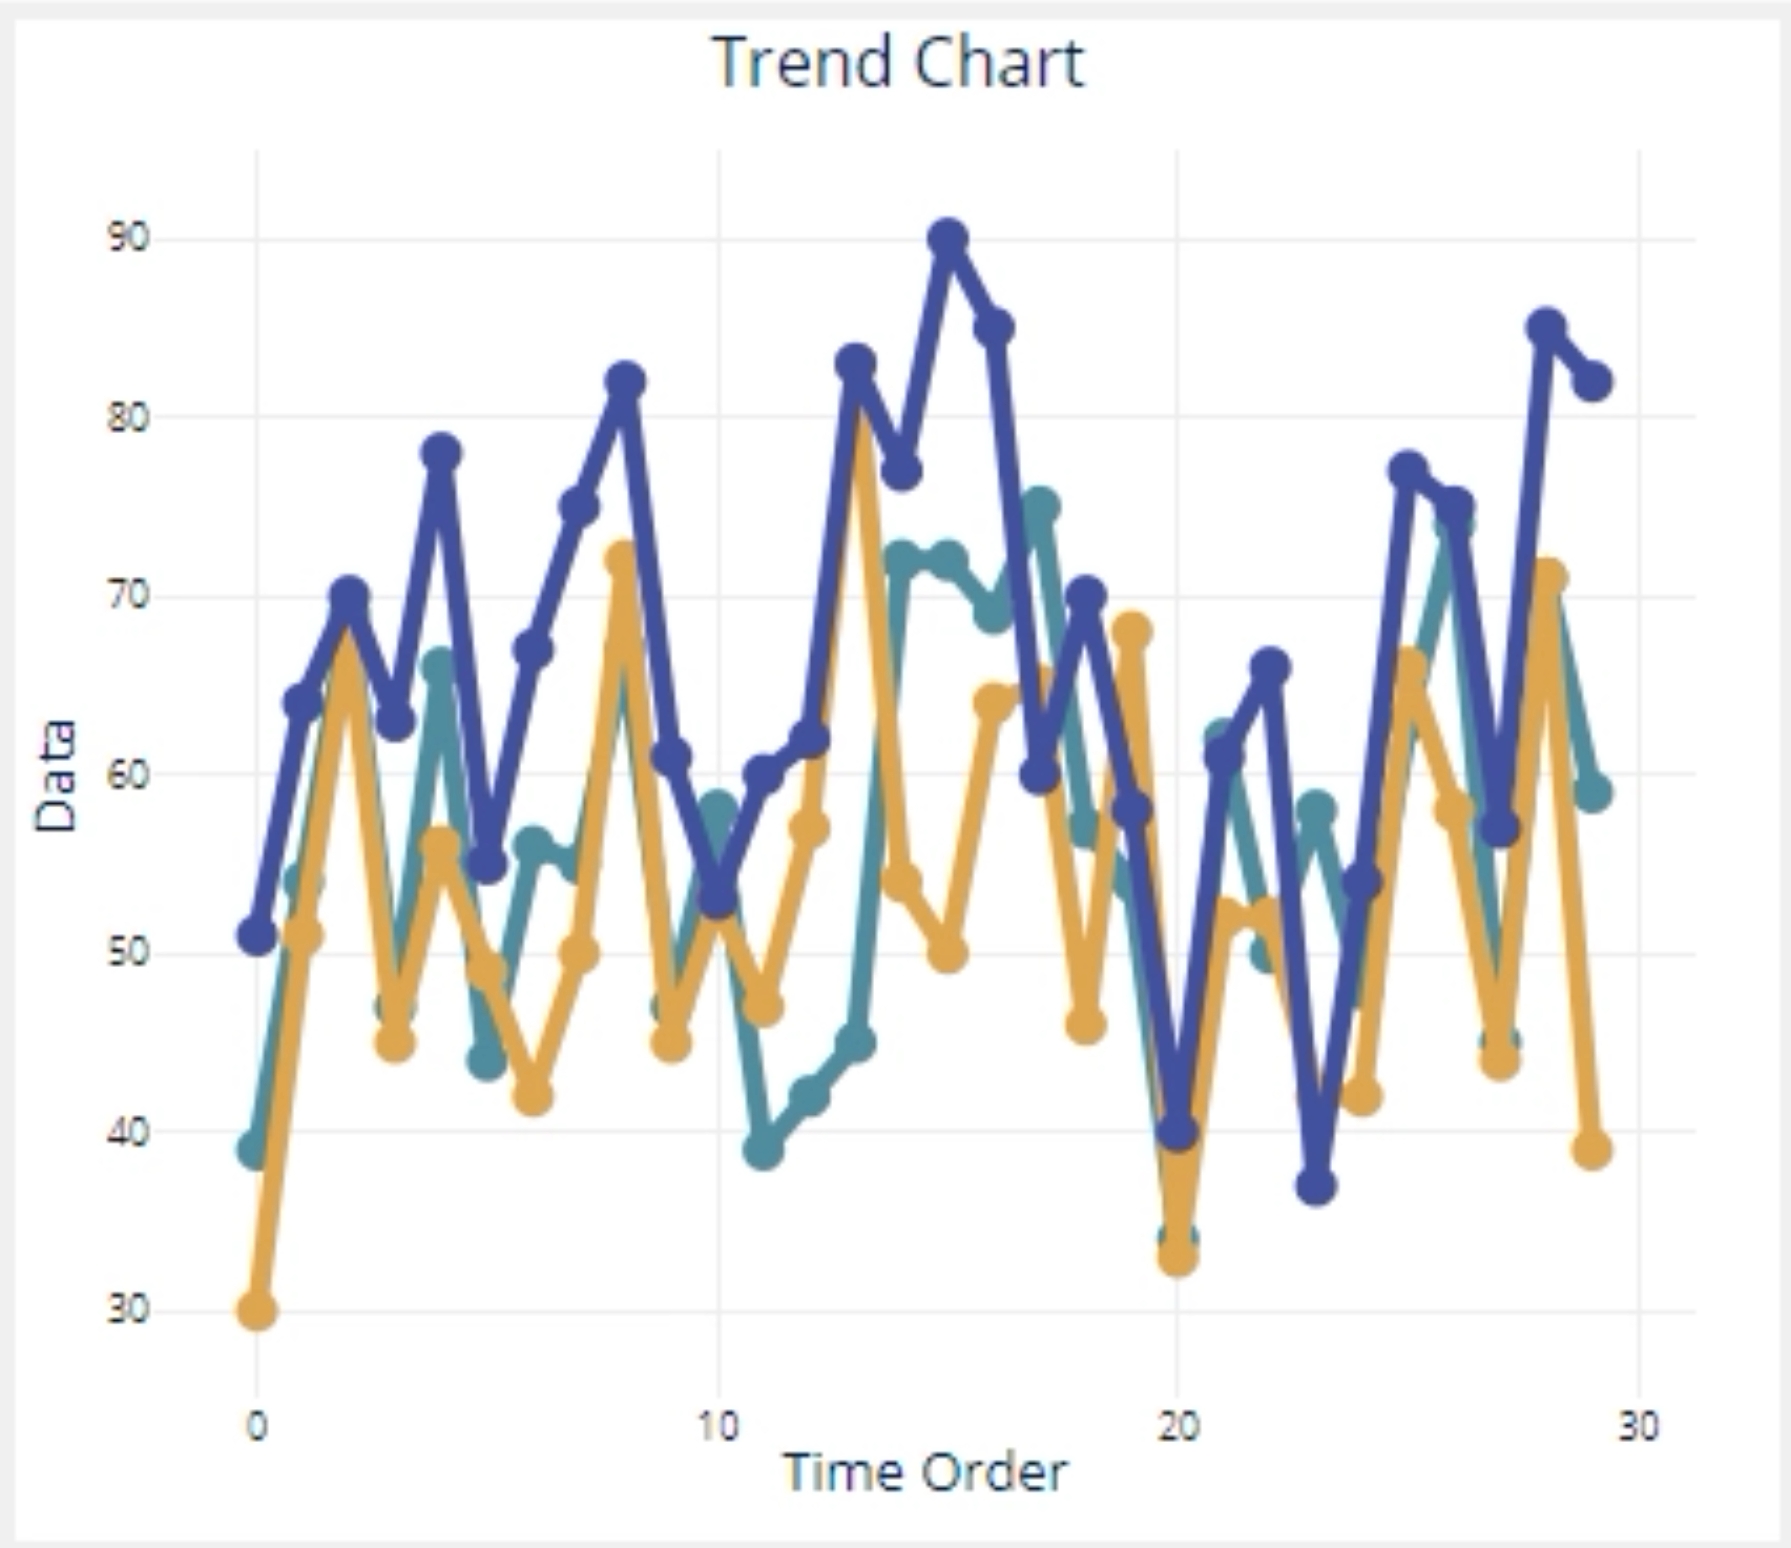 Sample graphical summary trend chart output.